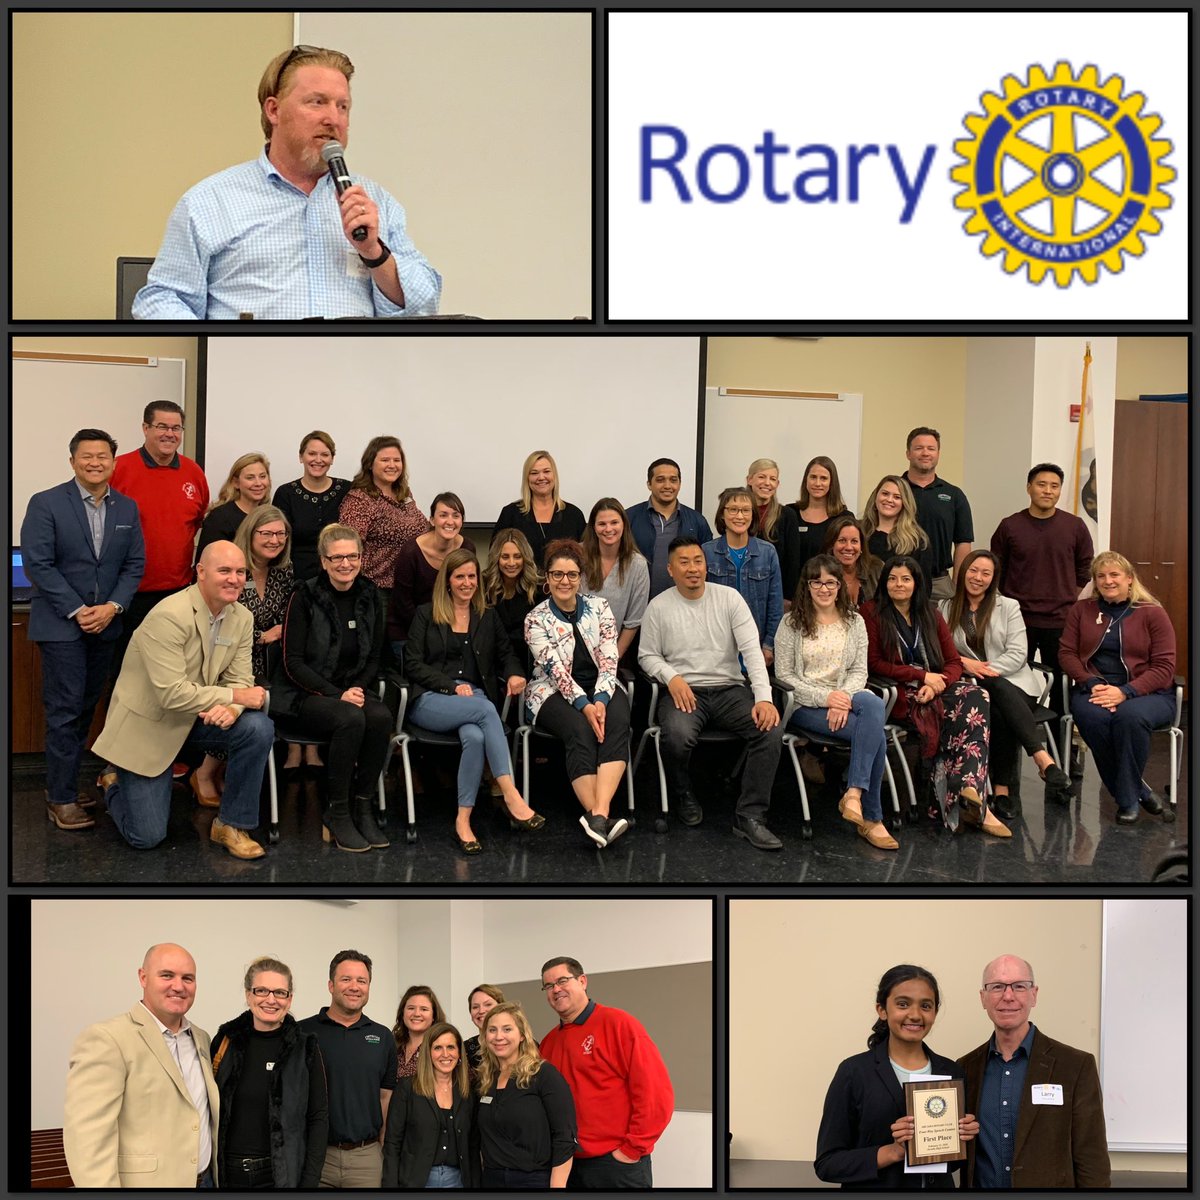 Great Mini-Grant event hosted by #Arcadia Chapter of @Rotary. TYSM for your continuous support of our Teachers and SS @AUSDHighlandOak @Lauren_Leahy @HollyDolphins @kelsey_kbrown @Dana_Mariners @RanchoLC_AUSD @themsdillman @FoothillsMS @ArcadiaUnified #ausdDCI